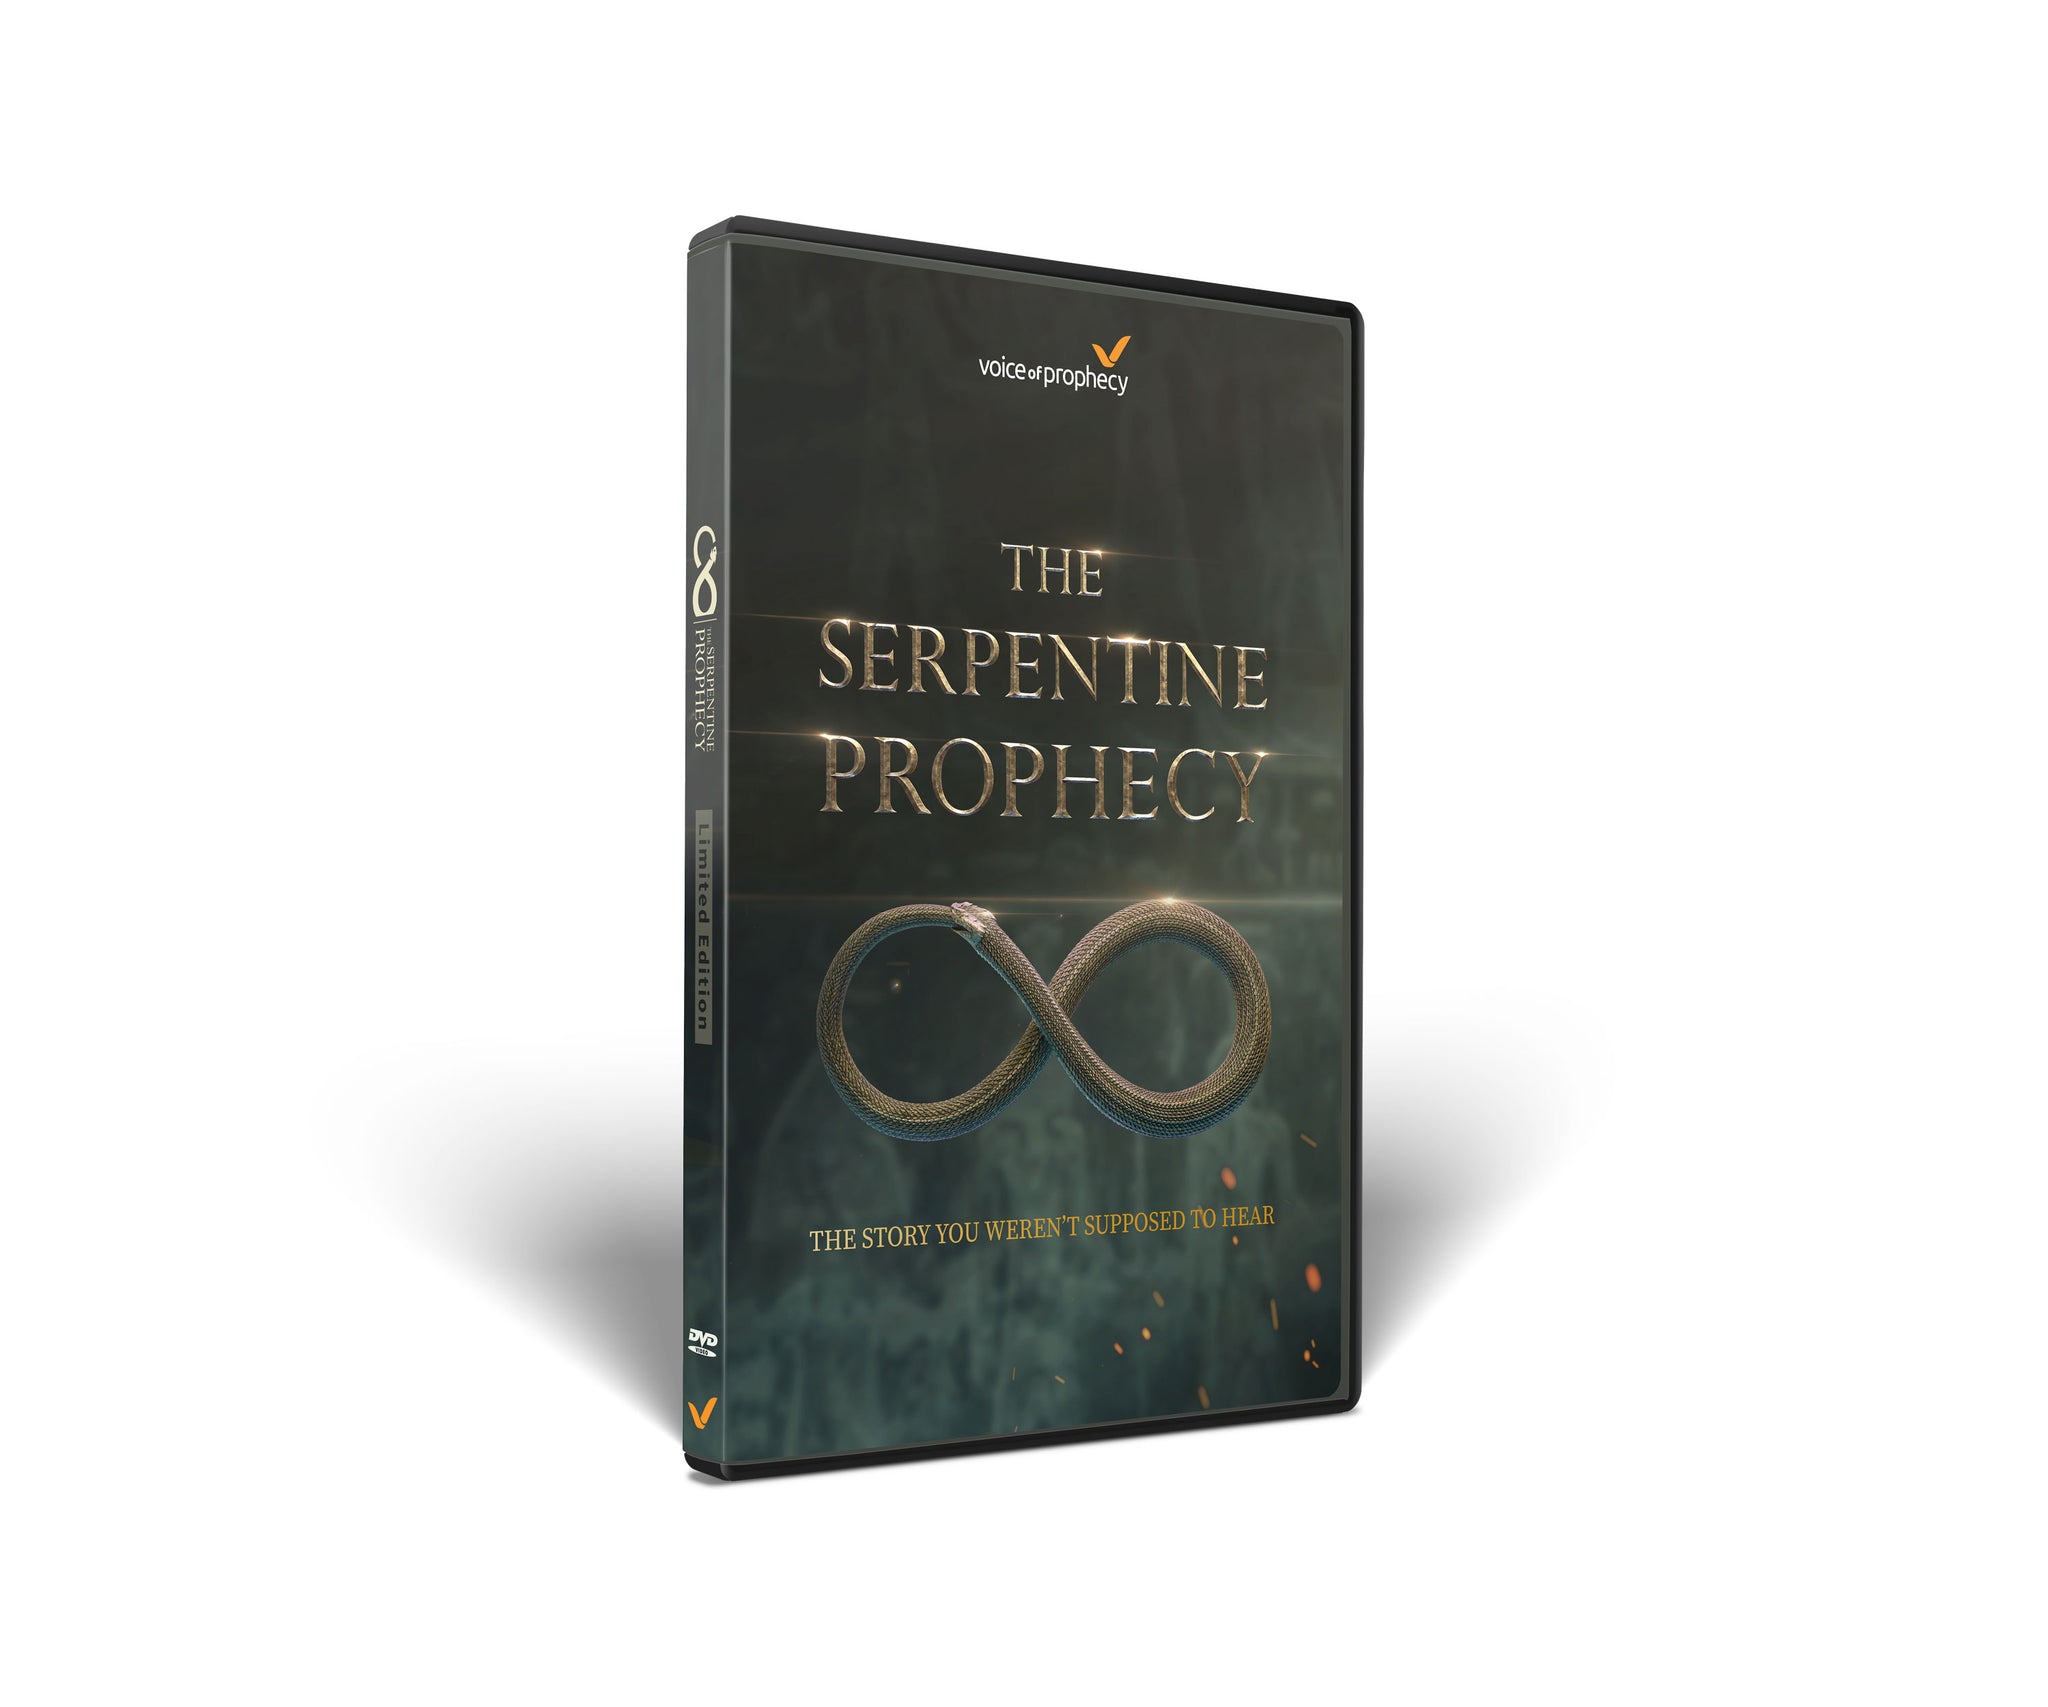 The Serpentine Prophecy DVD